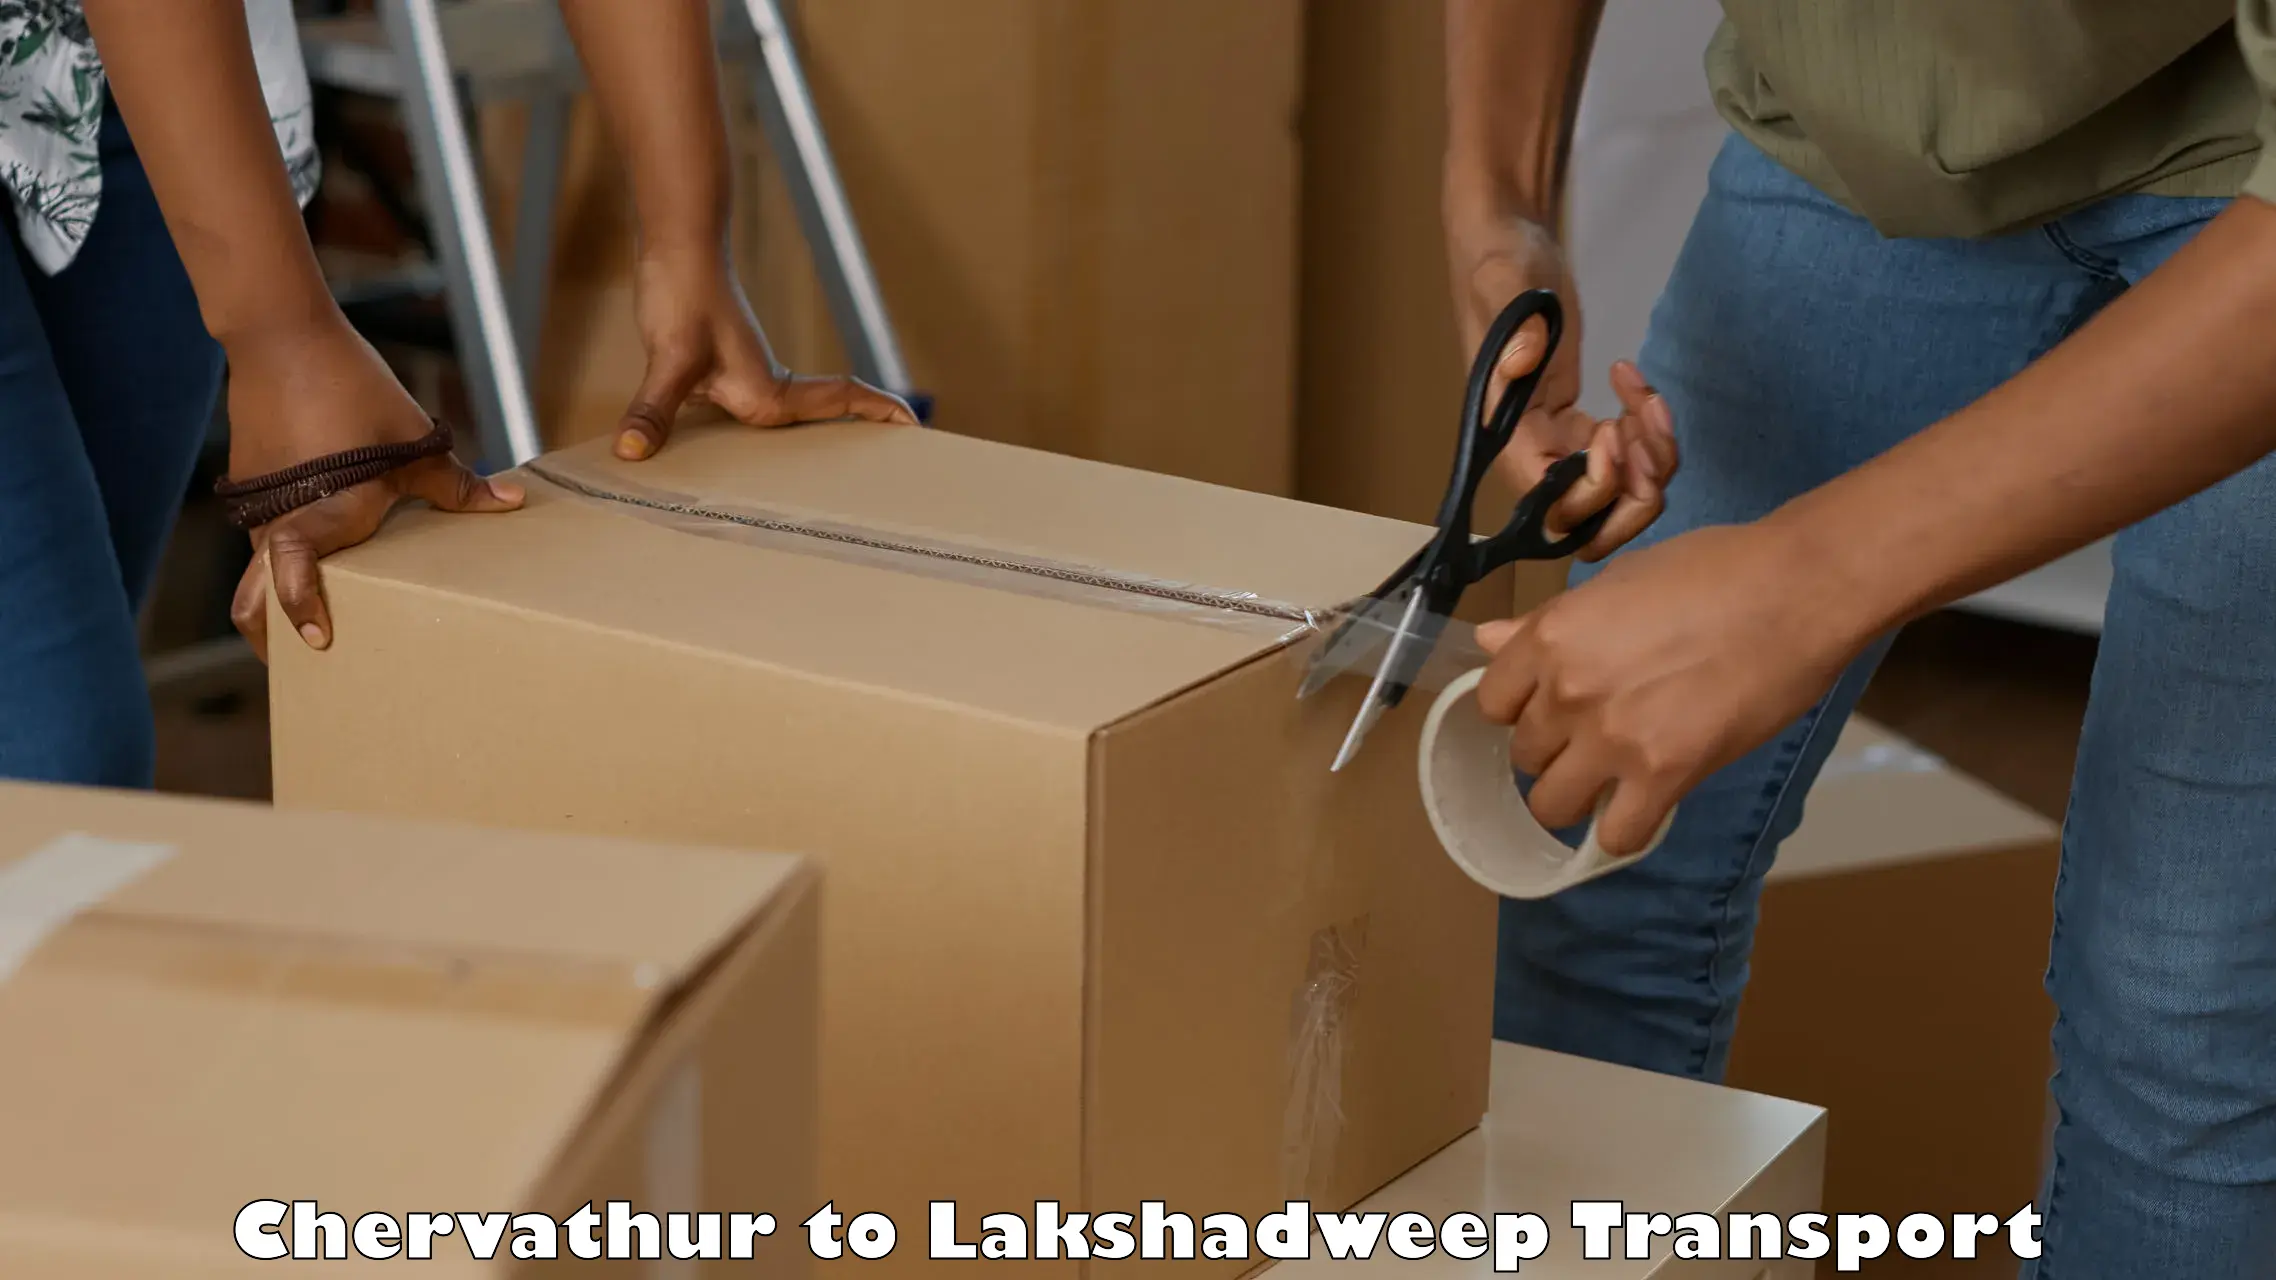 Goods transport services Chervathur to Lakshadweep